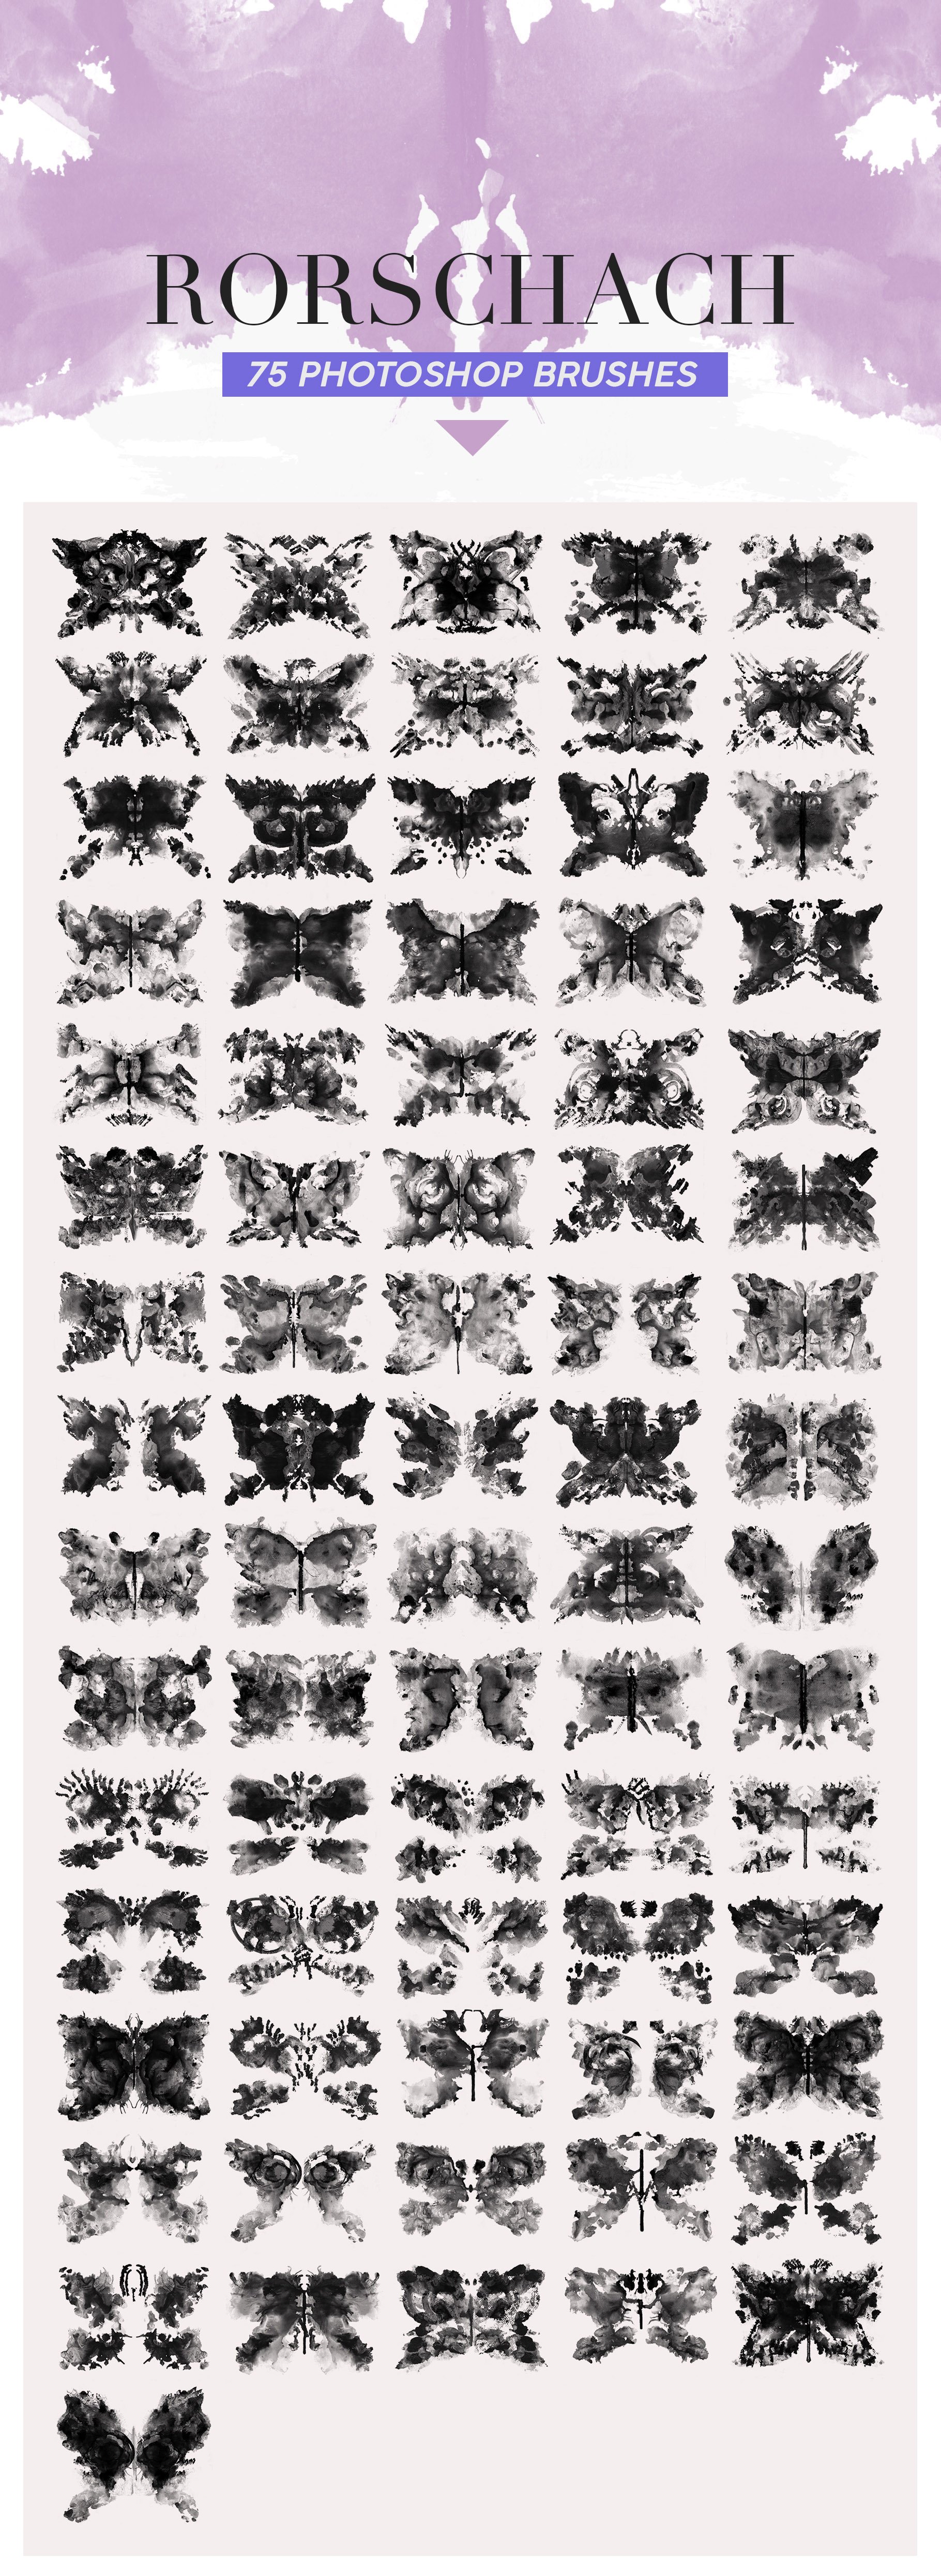 rorschach brushes preview 503